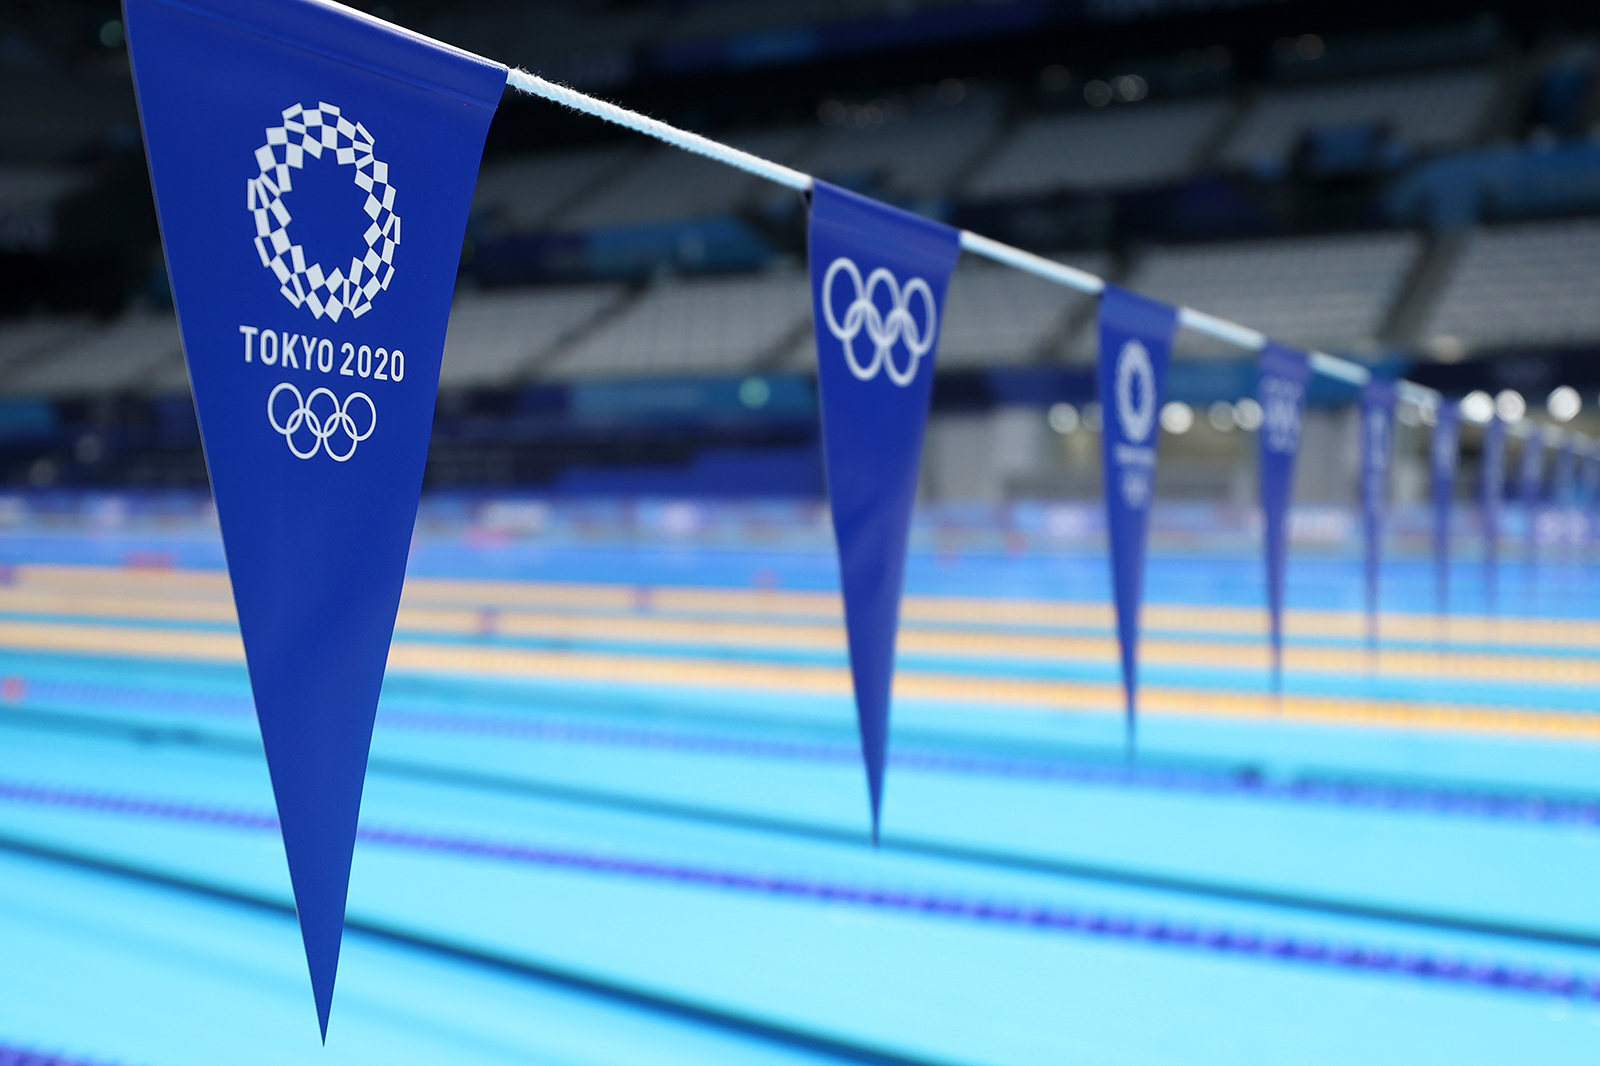 Flags hang over the swimming pool during aquatic training at the Tokyo Informatics Center ahead of the Tokyo 2020 Olympic Games on July 22, in Tokyo, Japan.